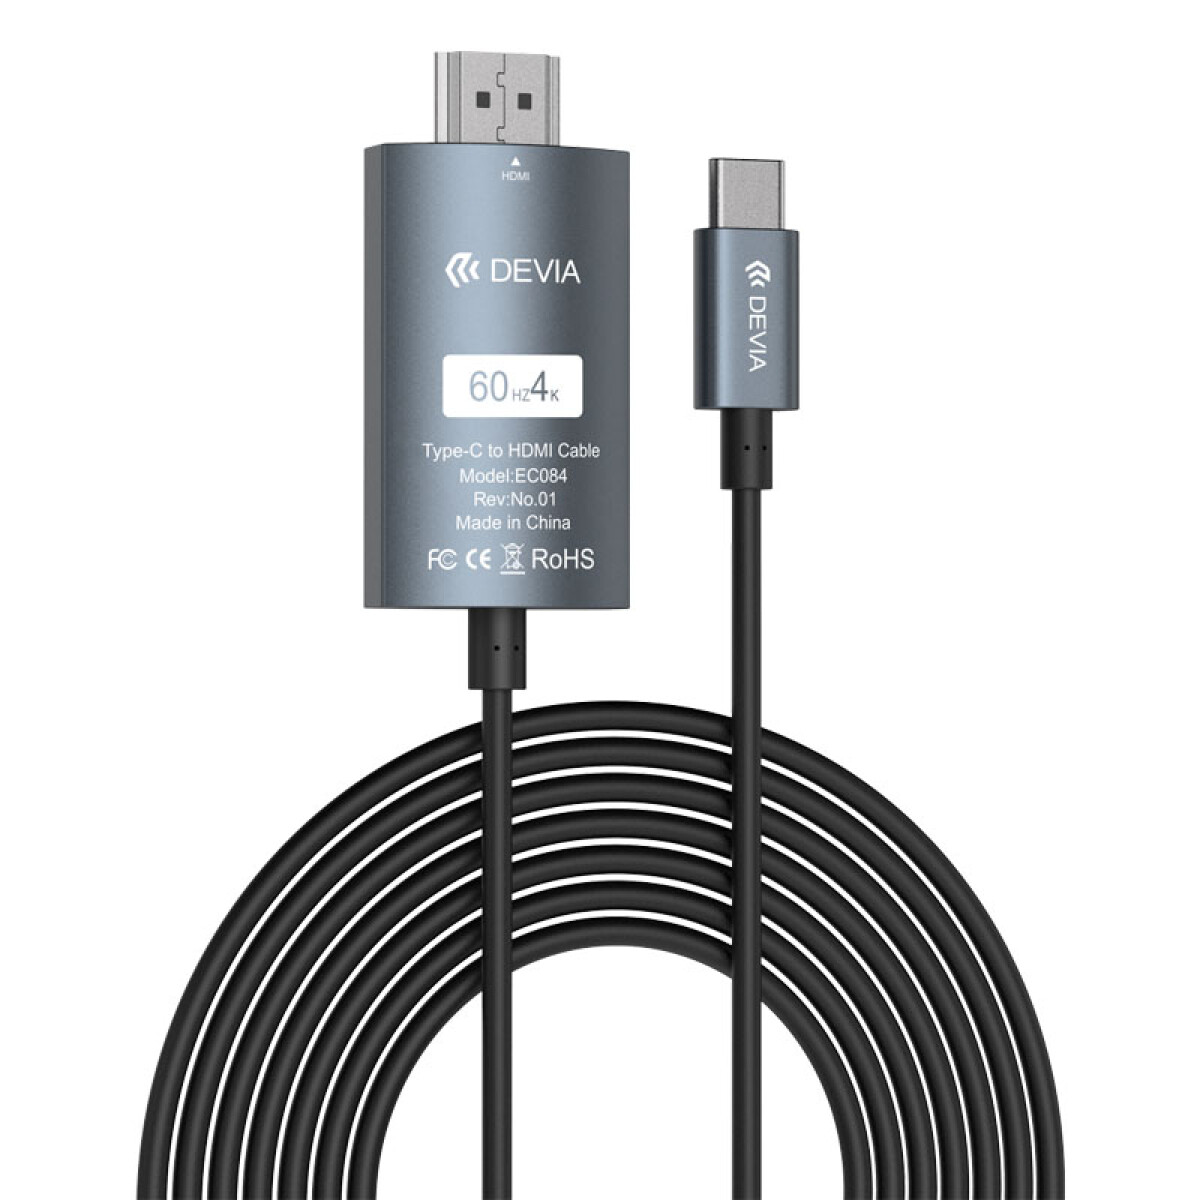 STORM SERIES HDMI CABLE (TYPE-C TO HDMI) - Negro 